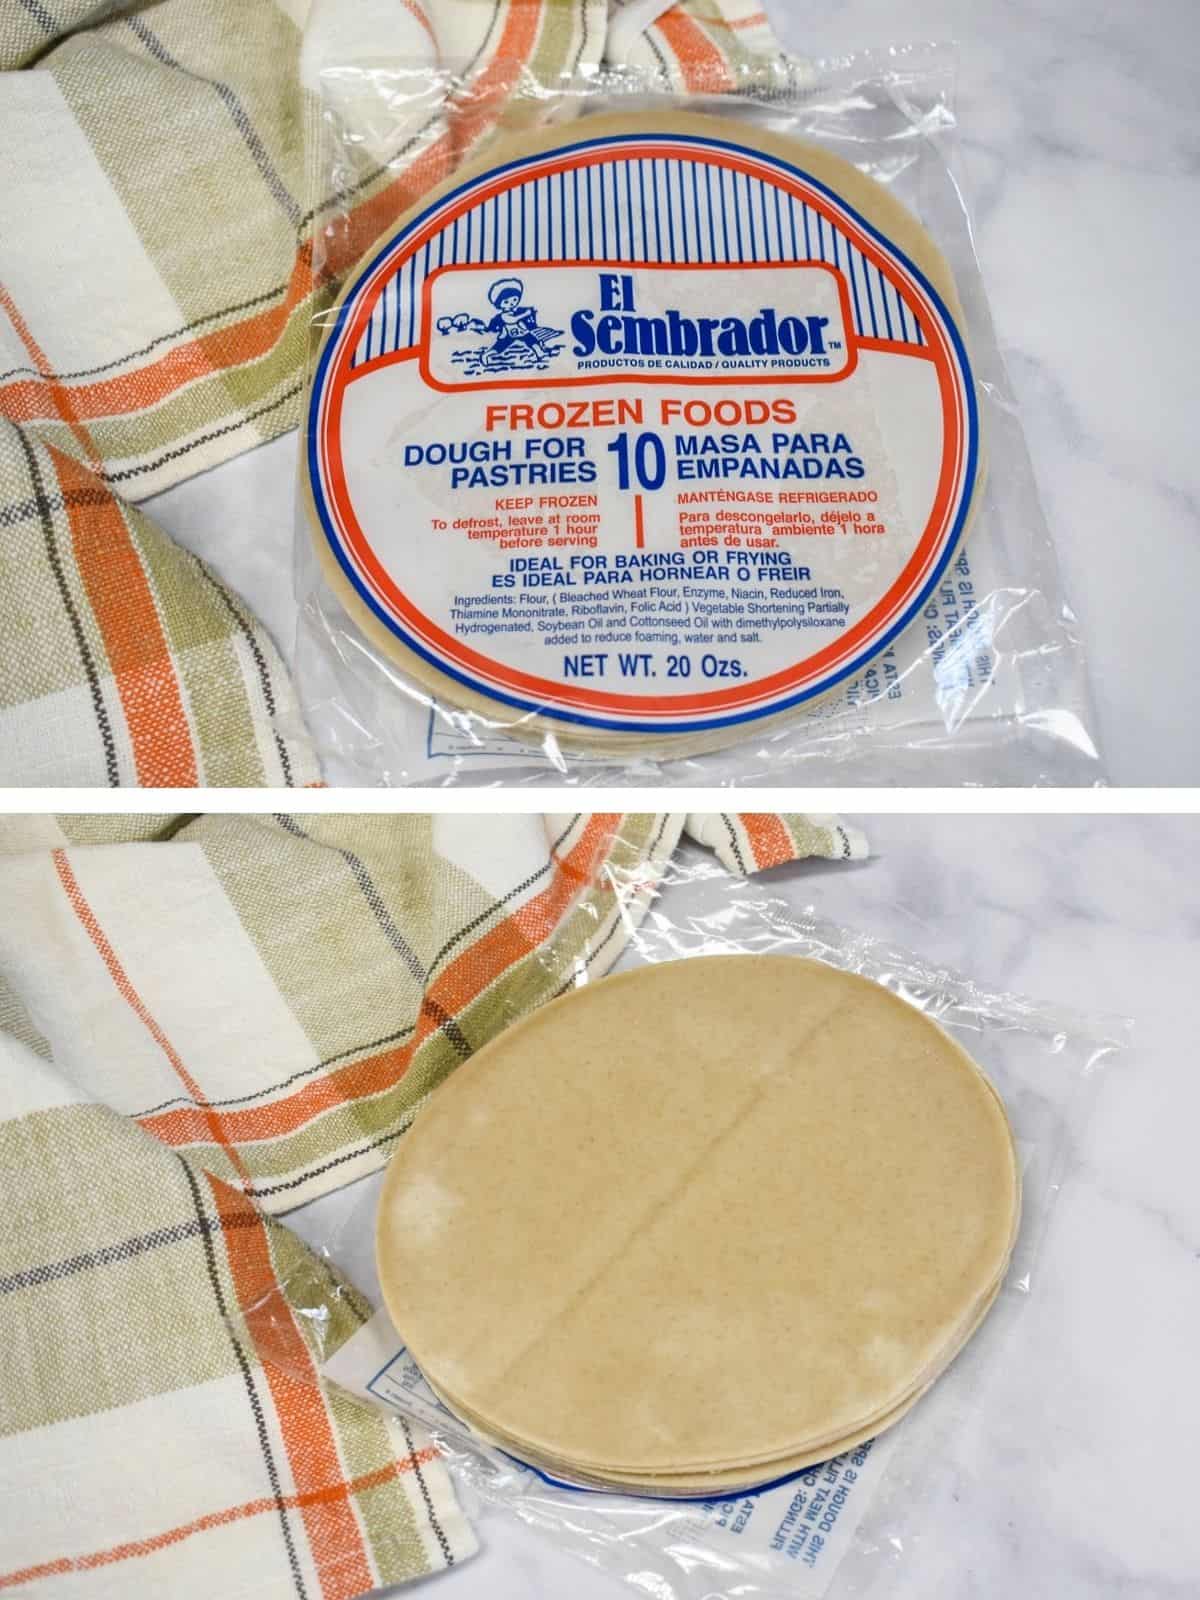 Two pictures of the thawed dough, the first is in the package still and the second if out of the package.